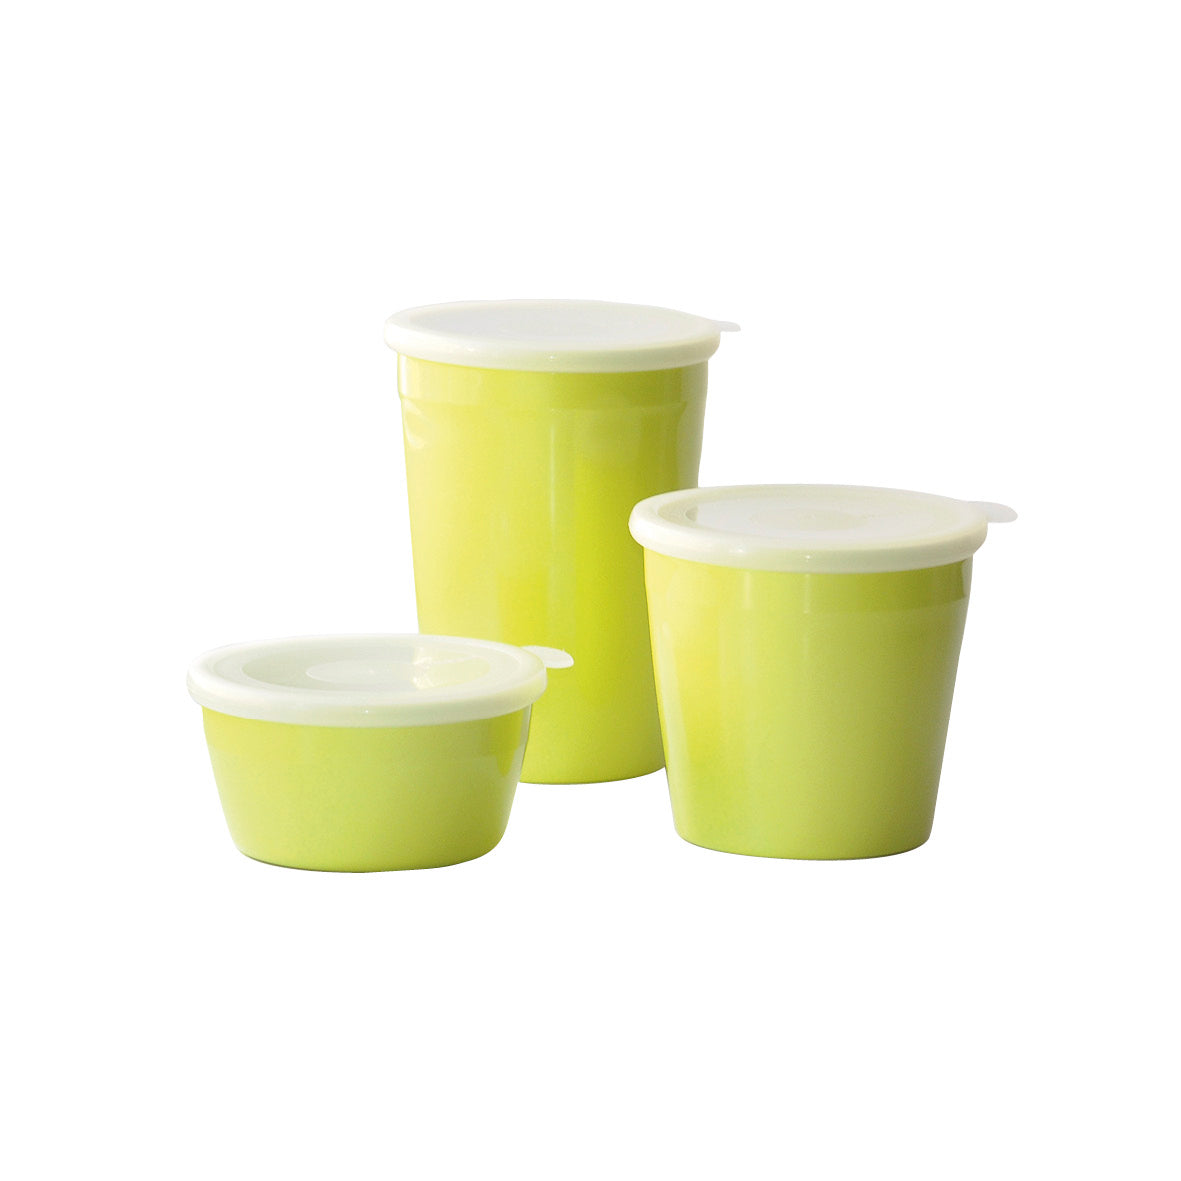 Set of 3 high food containers with lid - 350 ml + 700 ml + 1100 ml